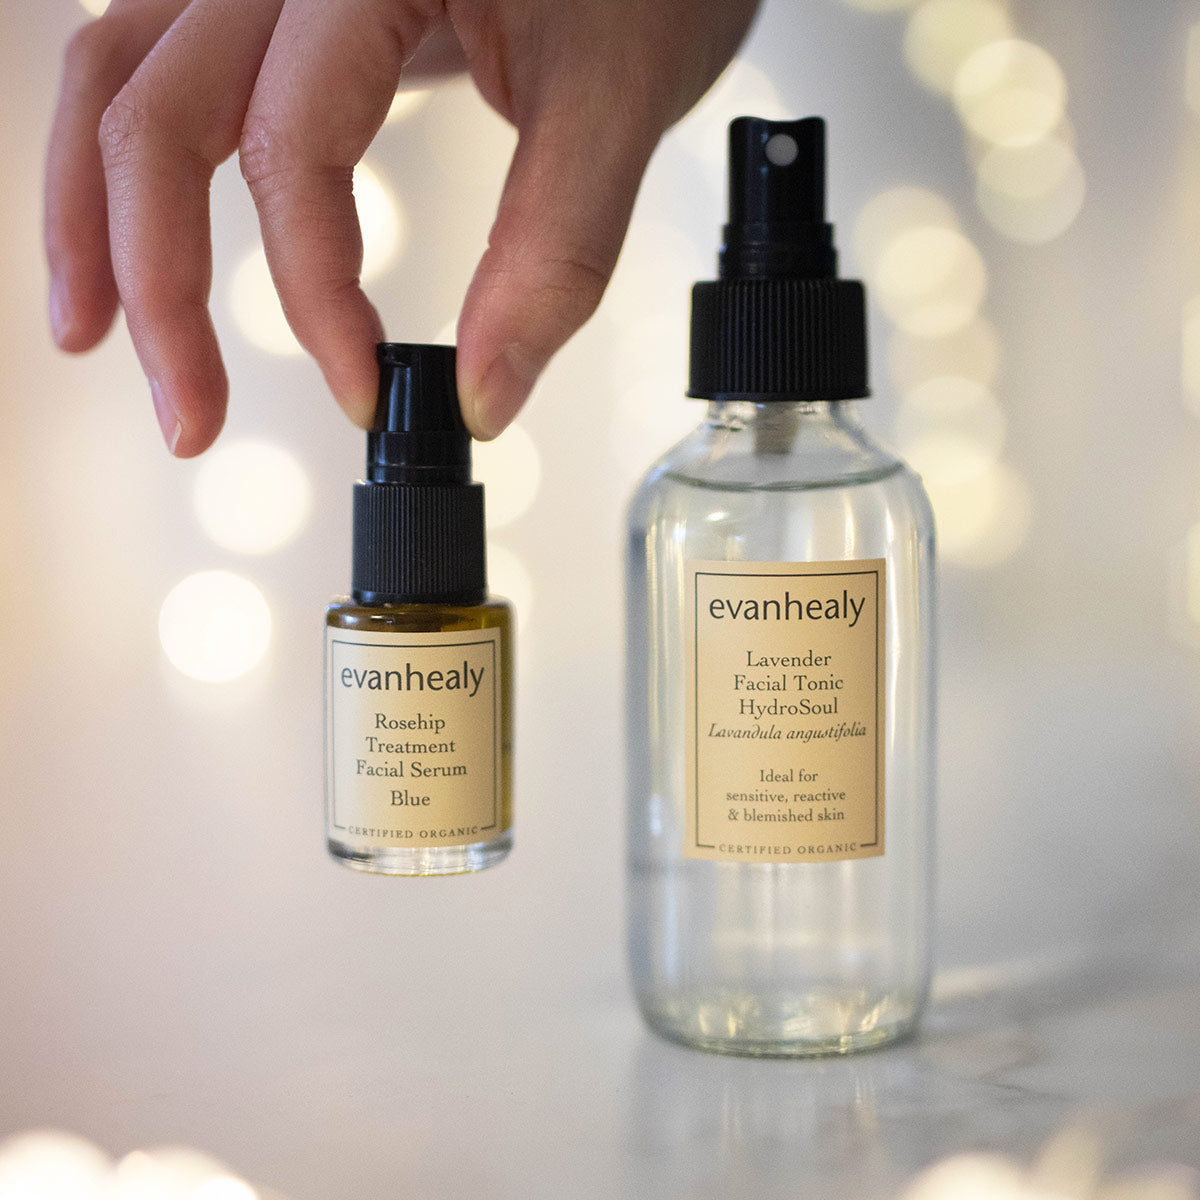 evanhealy calming ritual with rosehip blue oil serum in fingertips